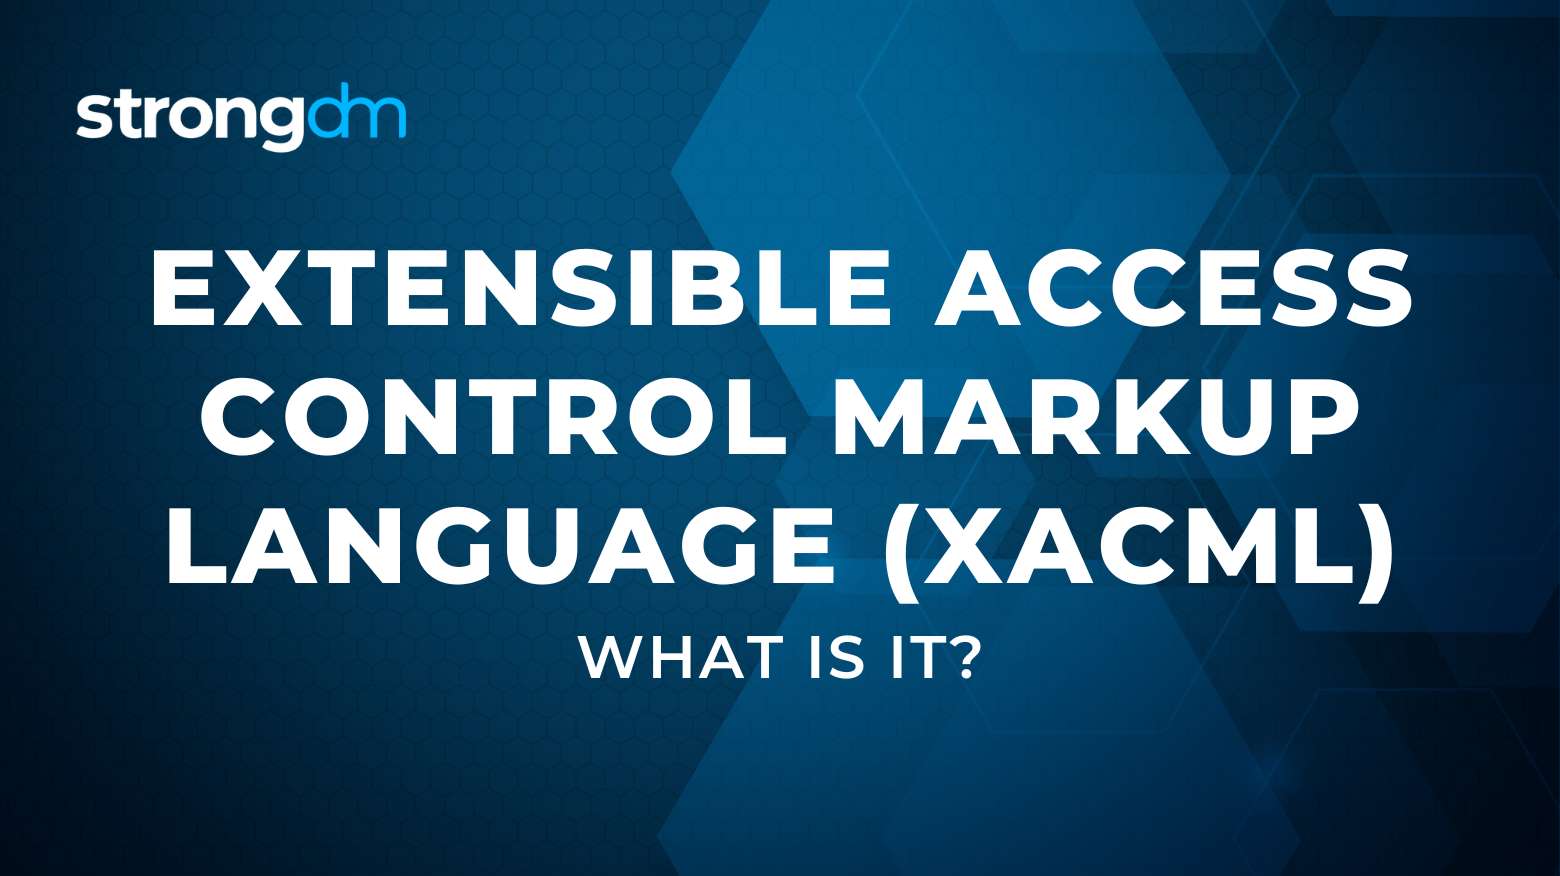 What Is eXtensible Access Control Markup Language (XACML)?